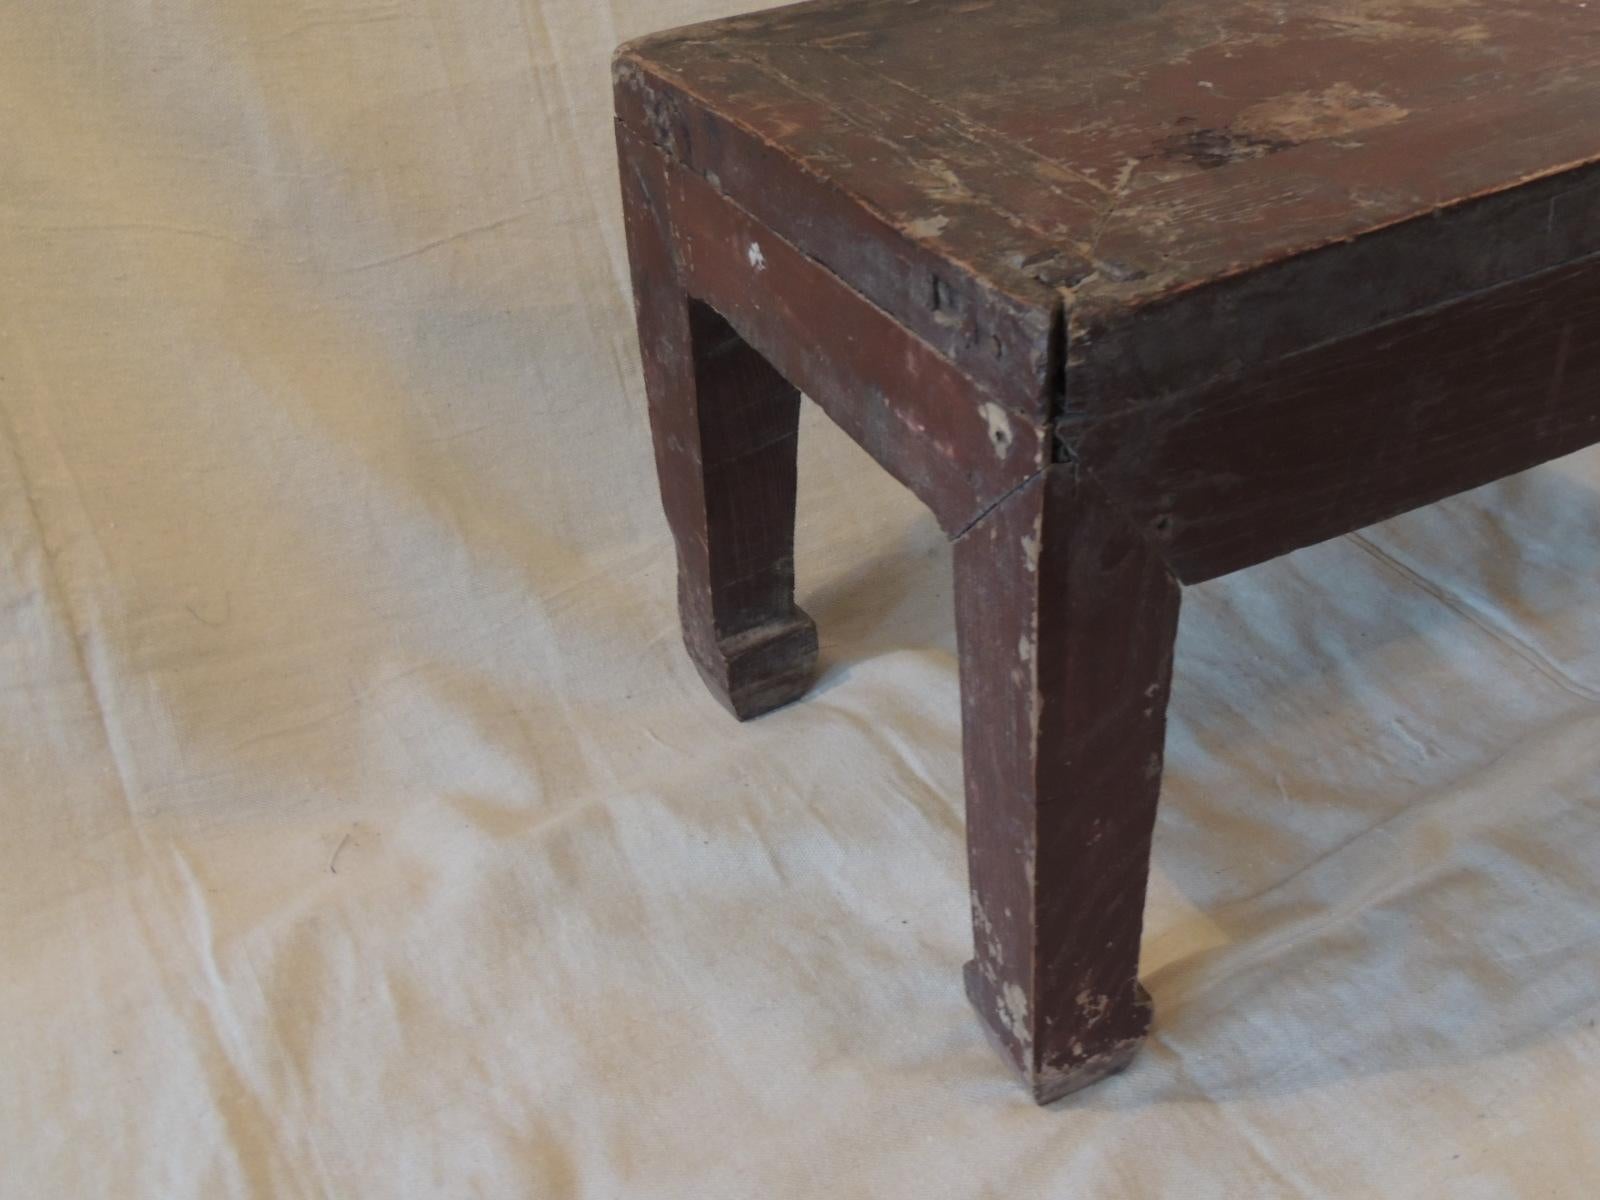 Vintage rustic low Chinese temple altar table.
Sturdy with traces of red lacquer in some places.
Size: 12.75 D x 25.5